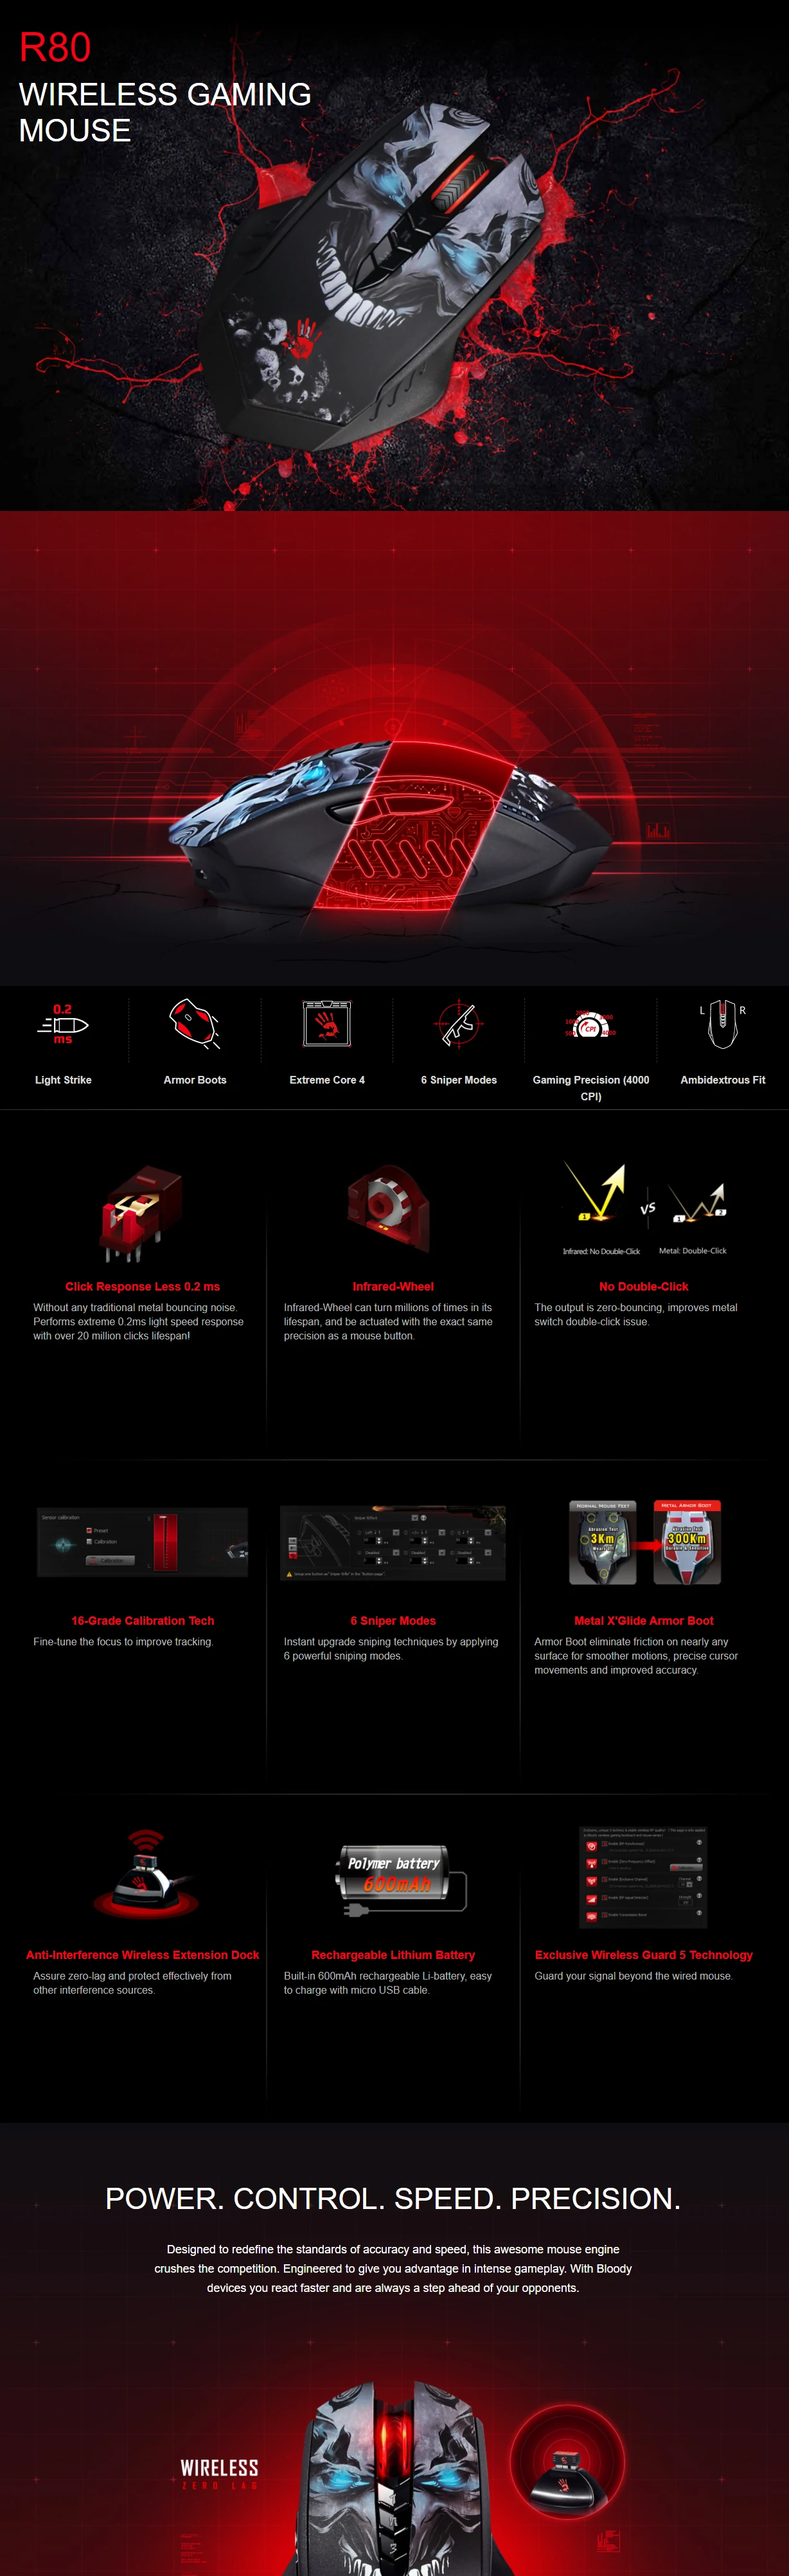 Overview - Bloody - R80 Wireless Gaming Mouse